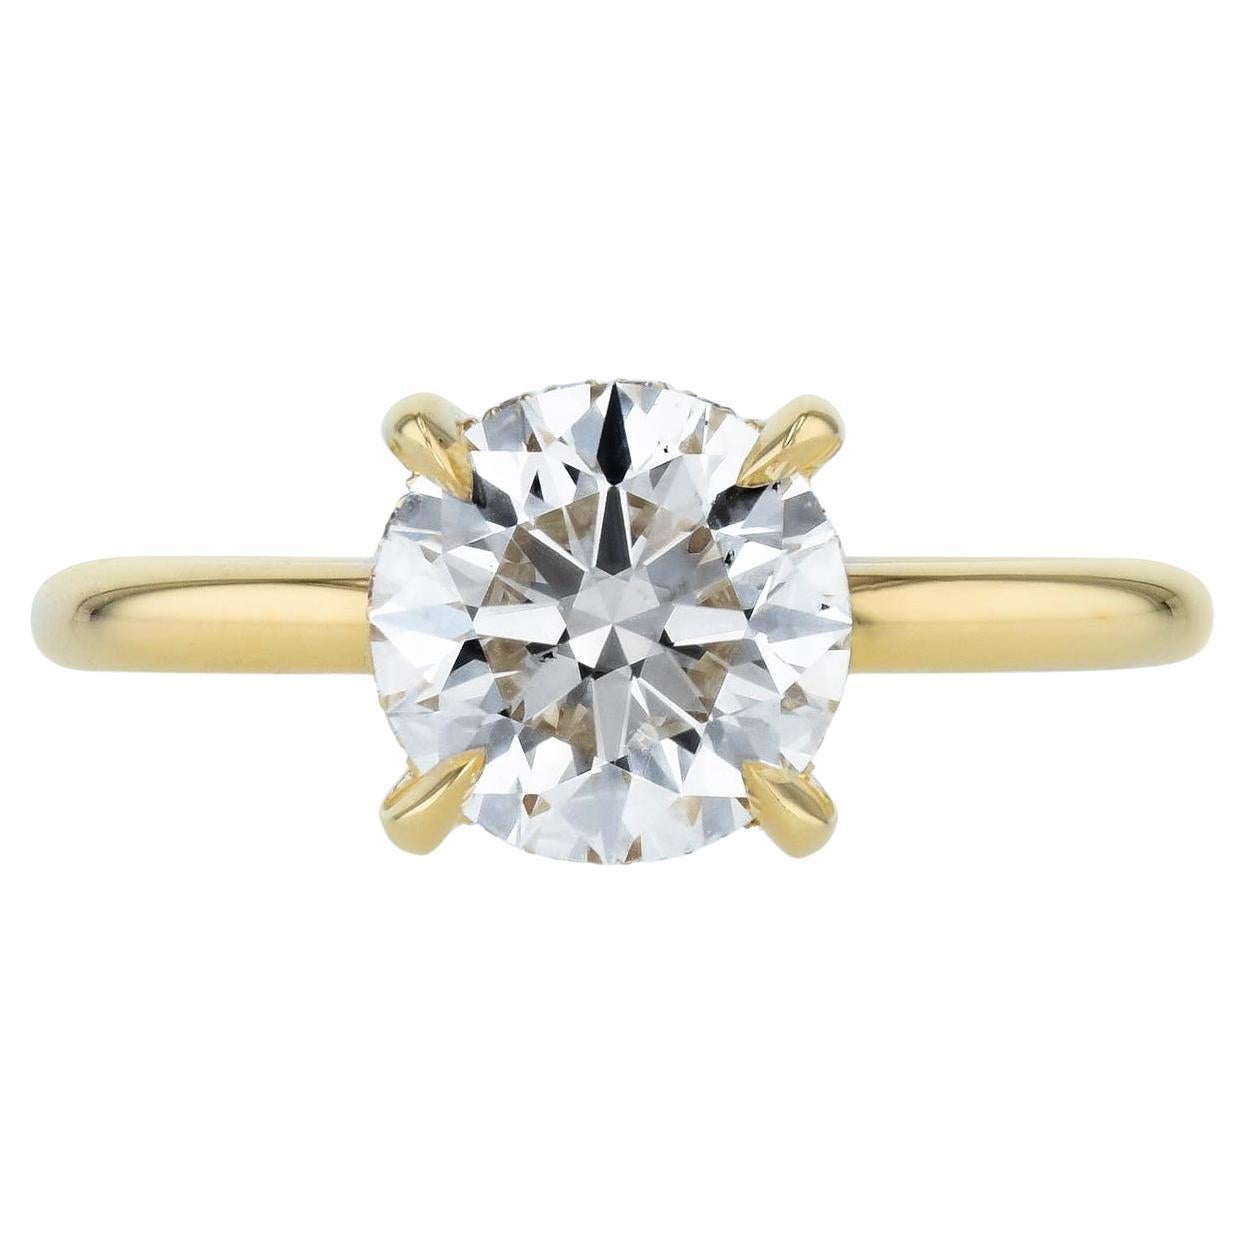 Handmade GIA Certified 2.09 Carat Round Diamond Yellow Gold Engagement Ring For Sale